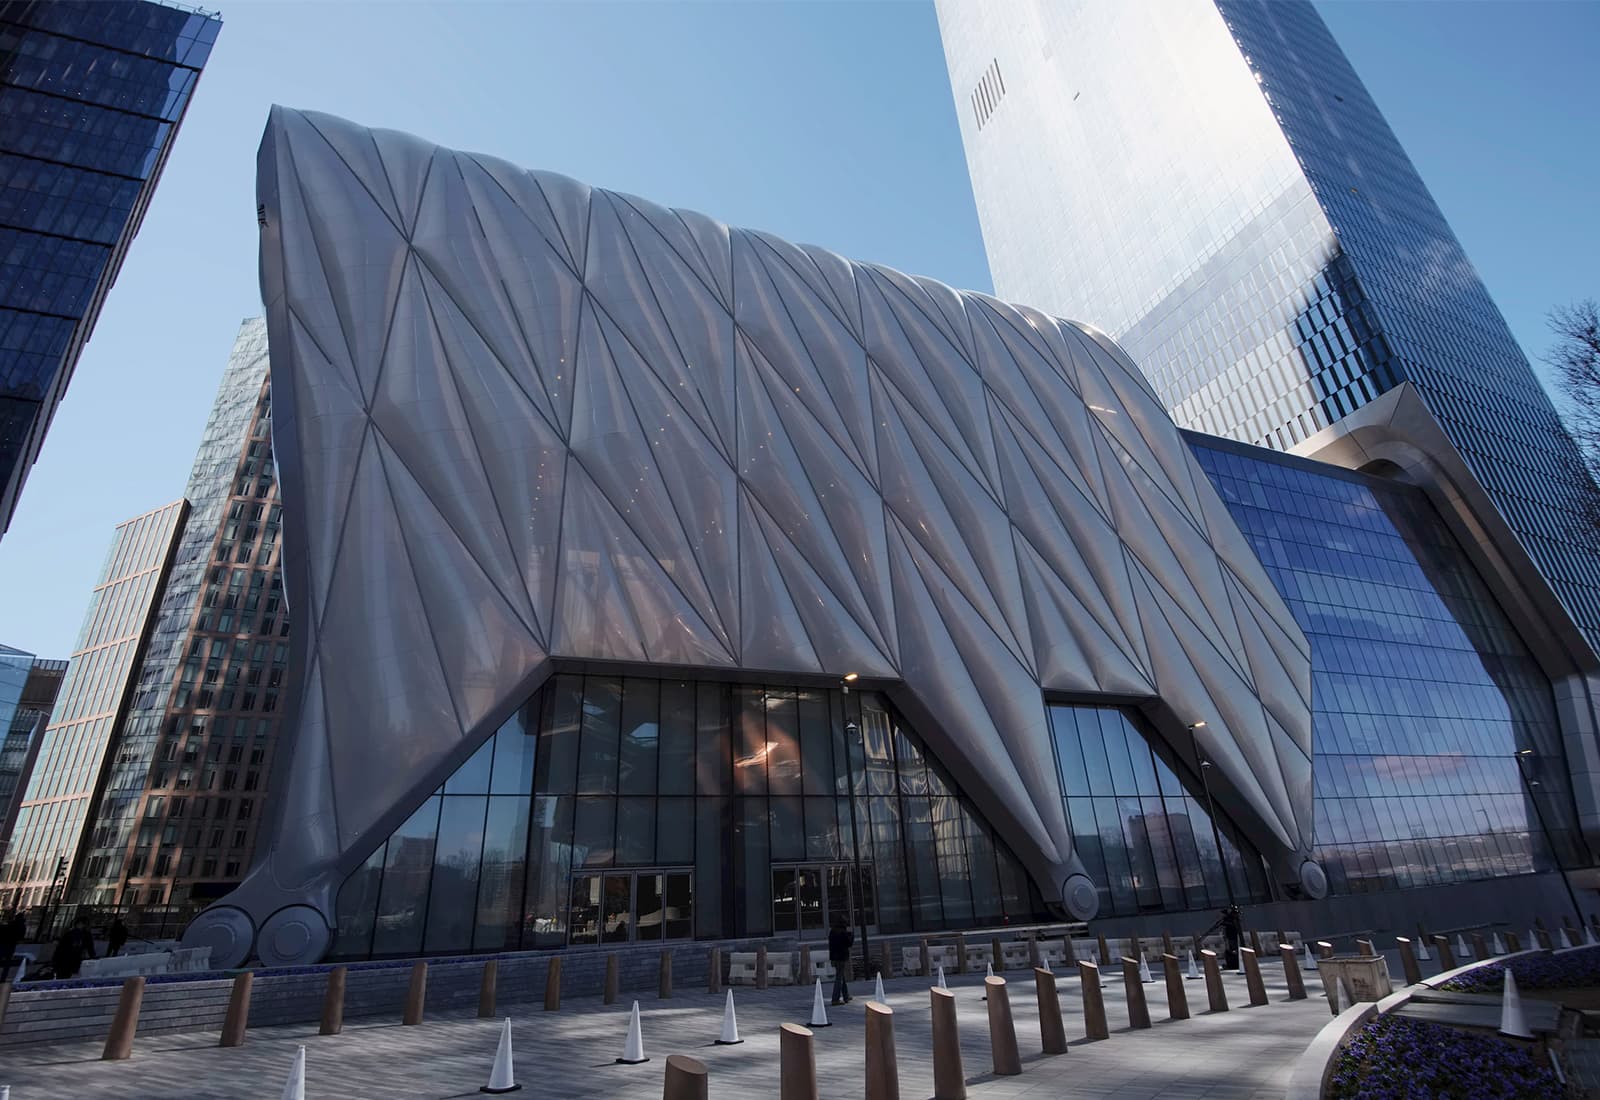 A dedication ceremony and ribbon cutting at Hudson Yards’ The Shed, ahead of the art center’s opening.